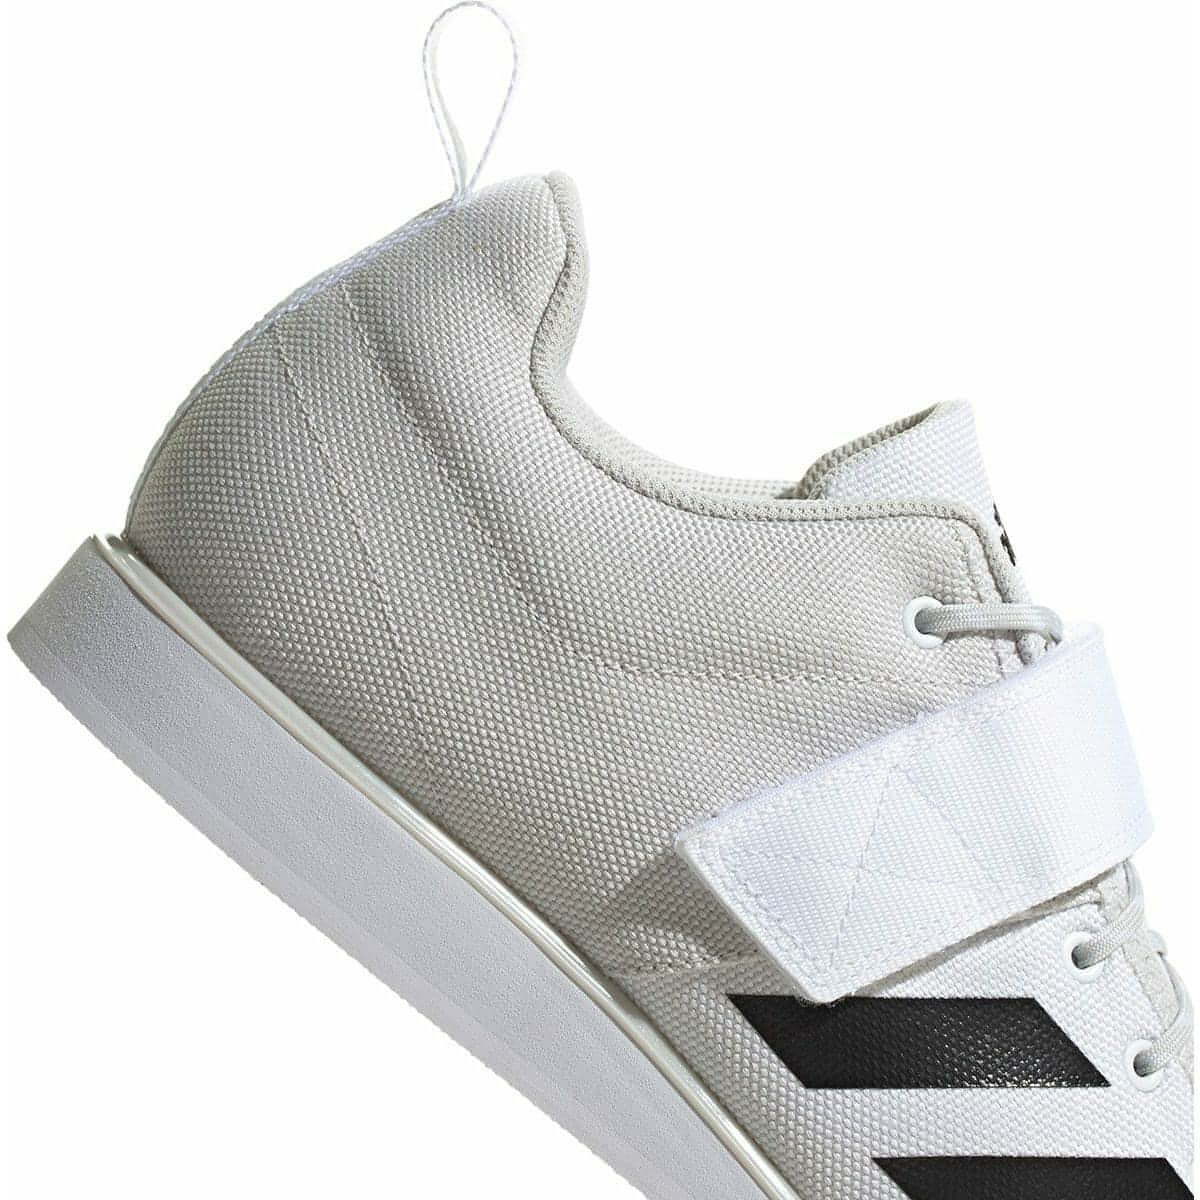 adidas Powerlift 4 Mens Weightlifting Shoes - White - Start Fitness